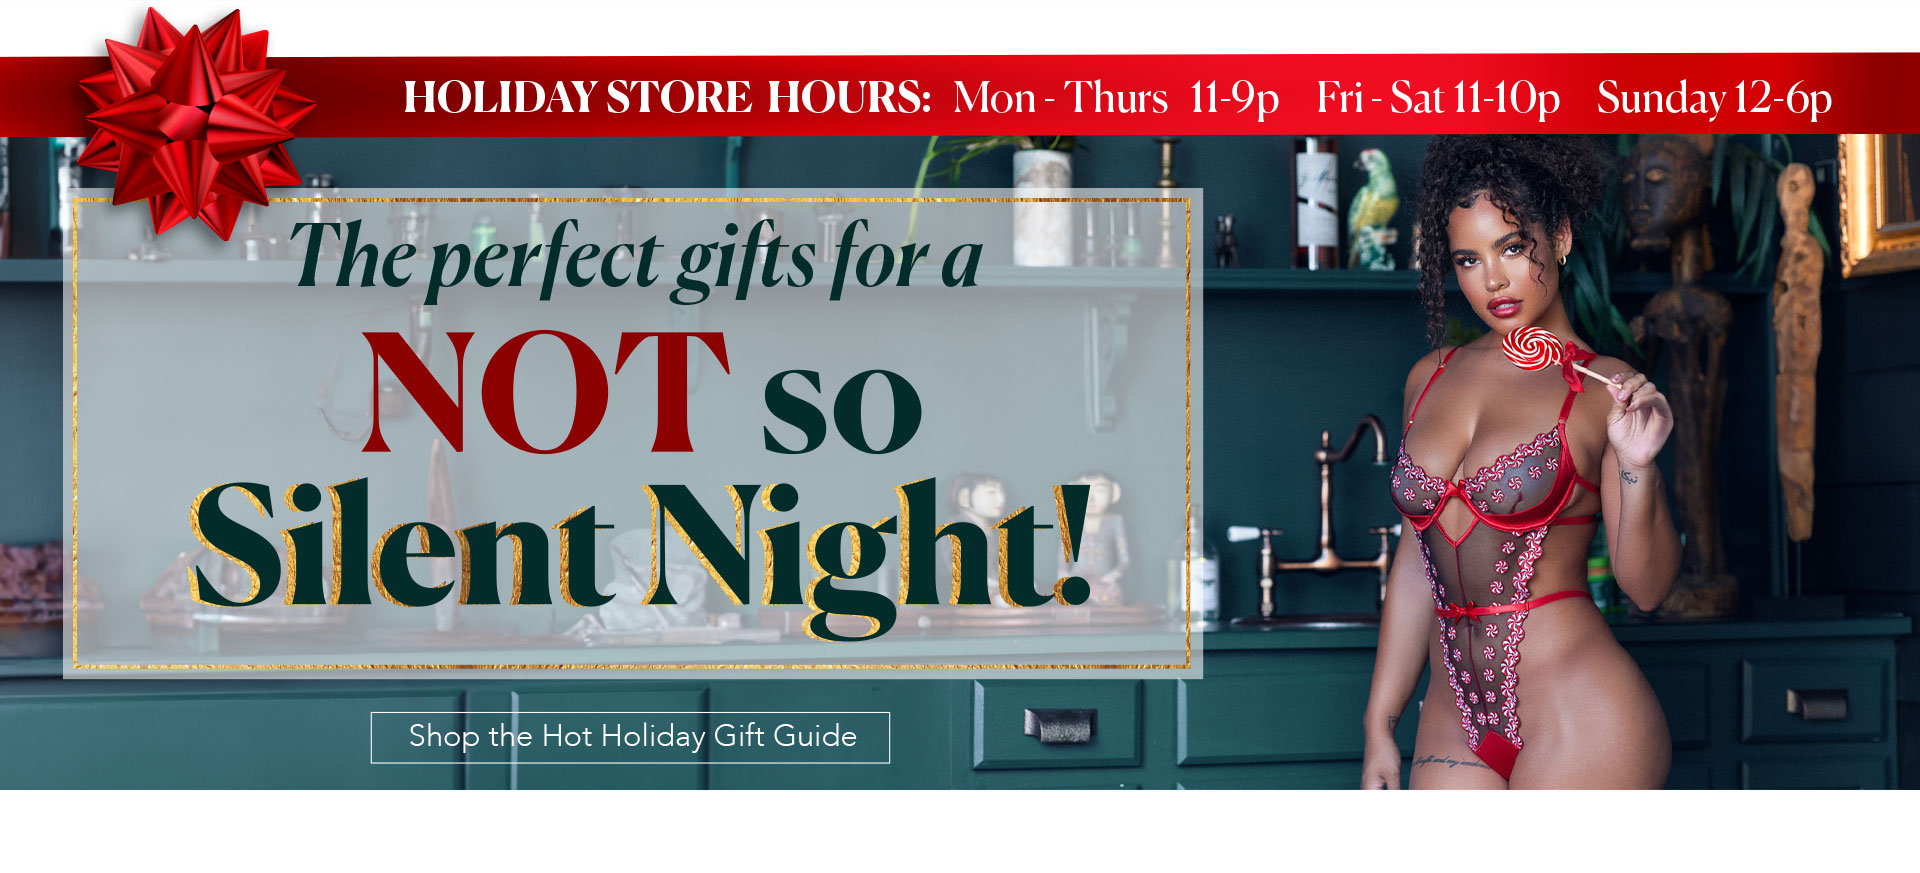 HOLIDAY STORE  HOURS: Mon-Thurs 11-9p, Fri-Sat 11-10p, Sunday 12-6p - The Perfect gifts for a NOT so Silent Night - Shop the Hot Holiday Gift Guide